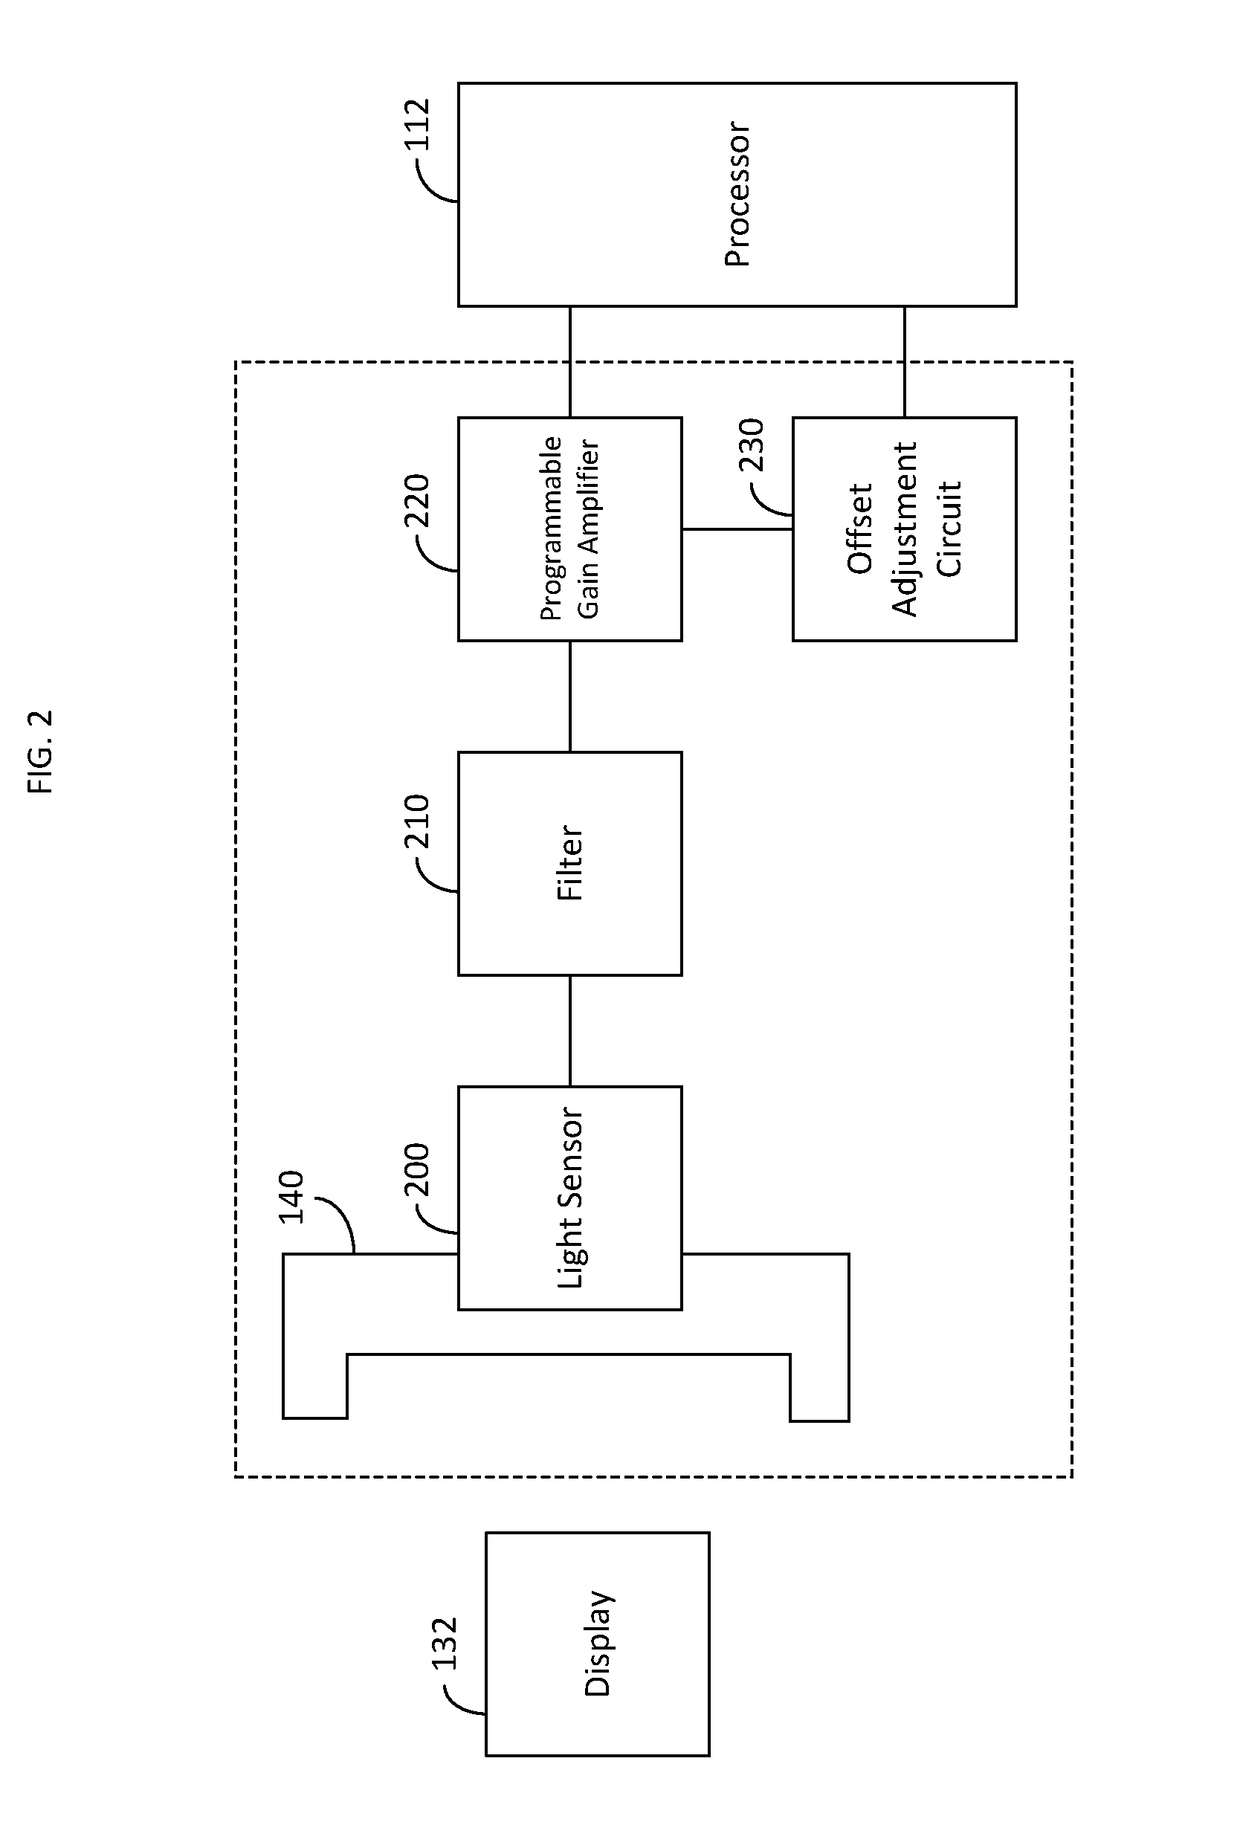 Intermittent display issue monitoring system